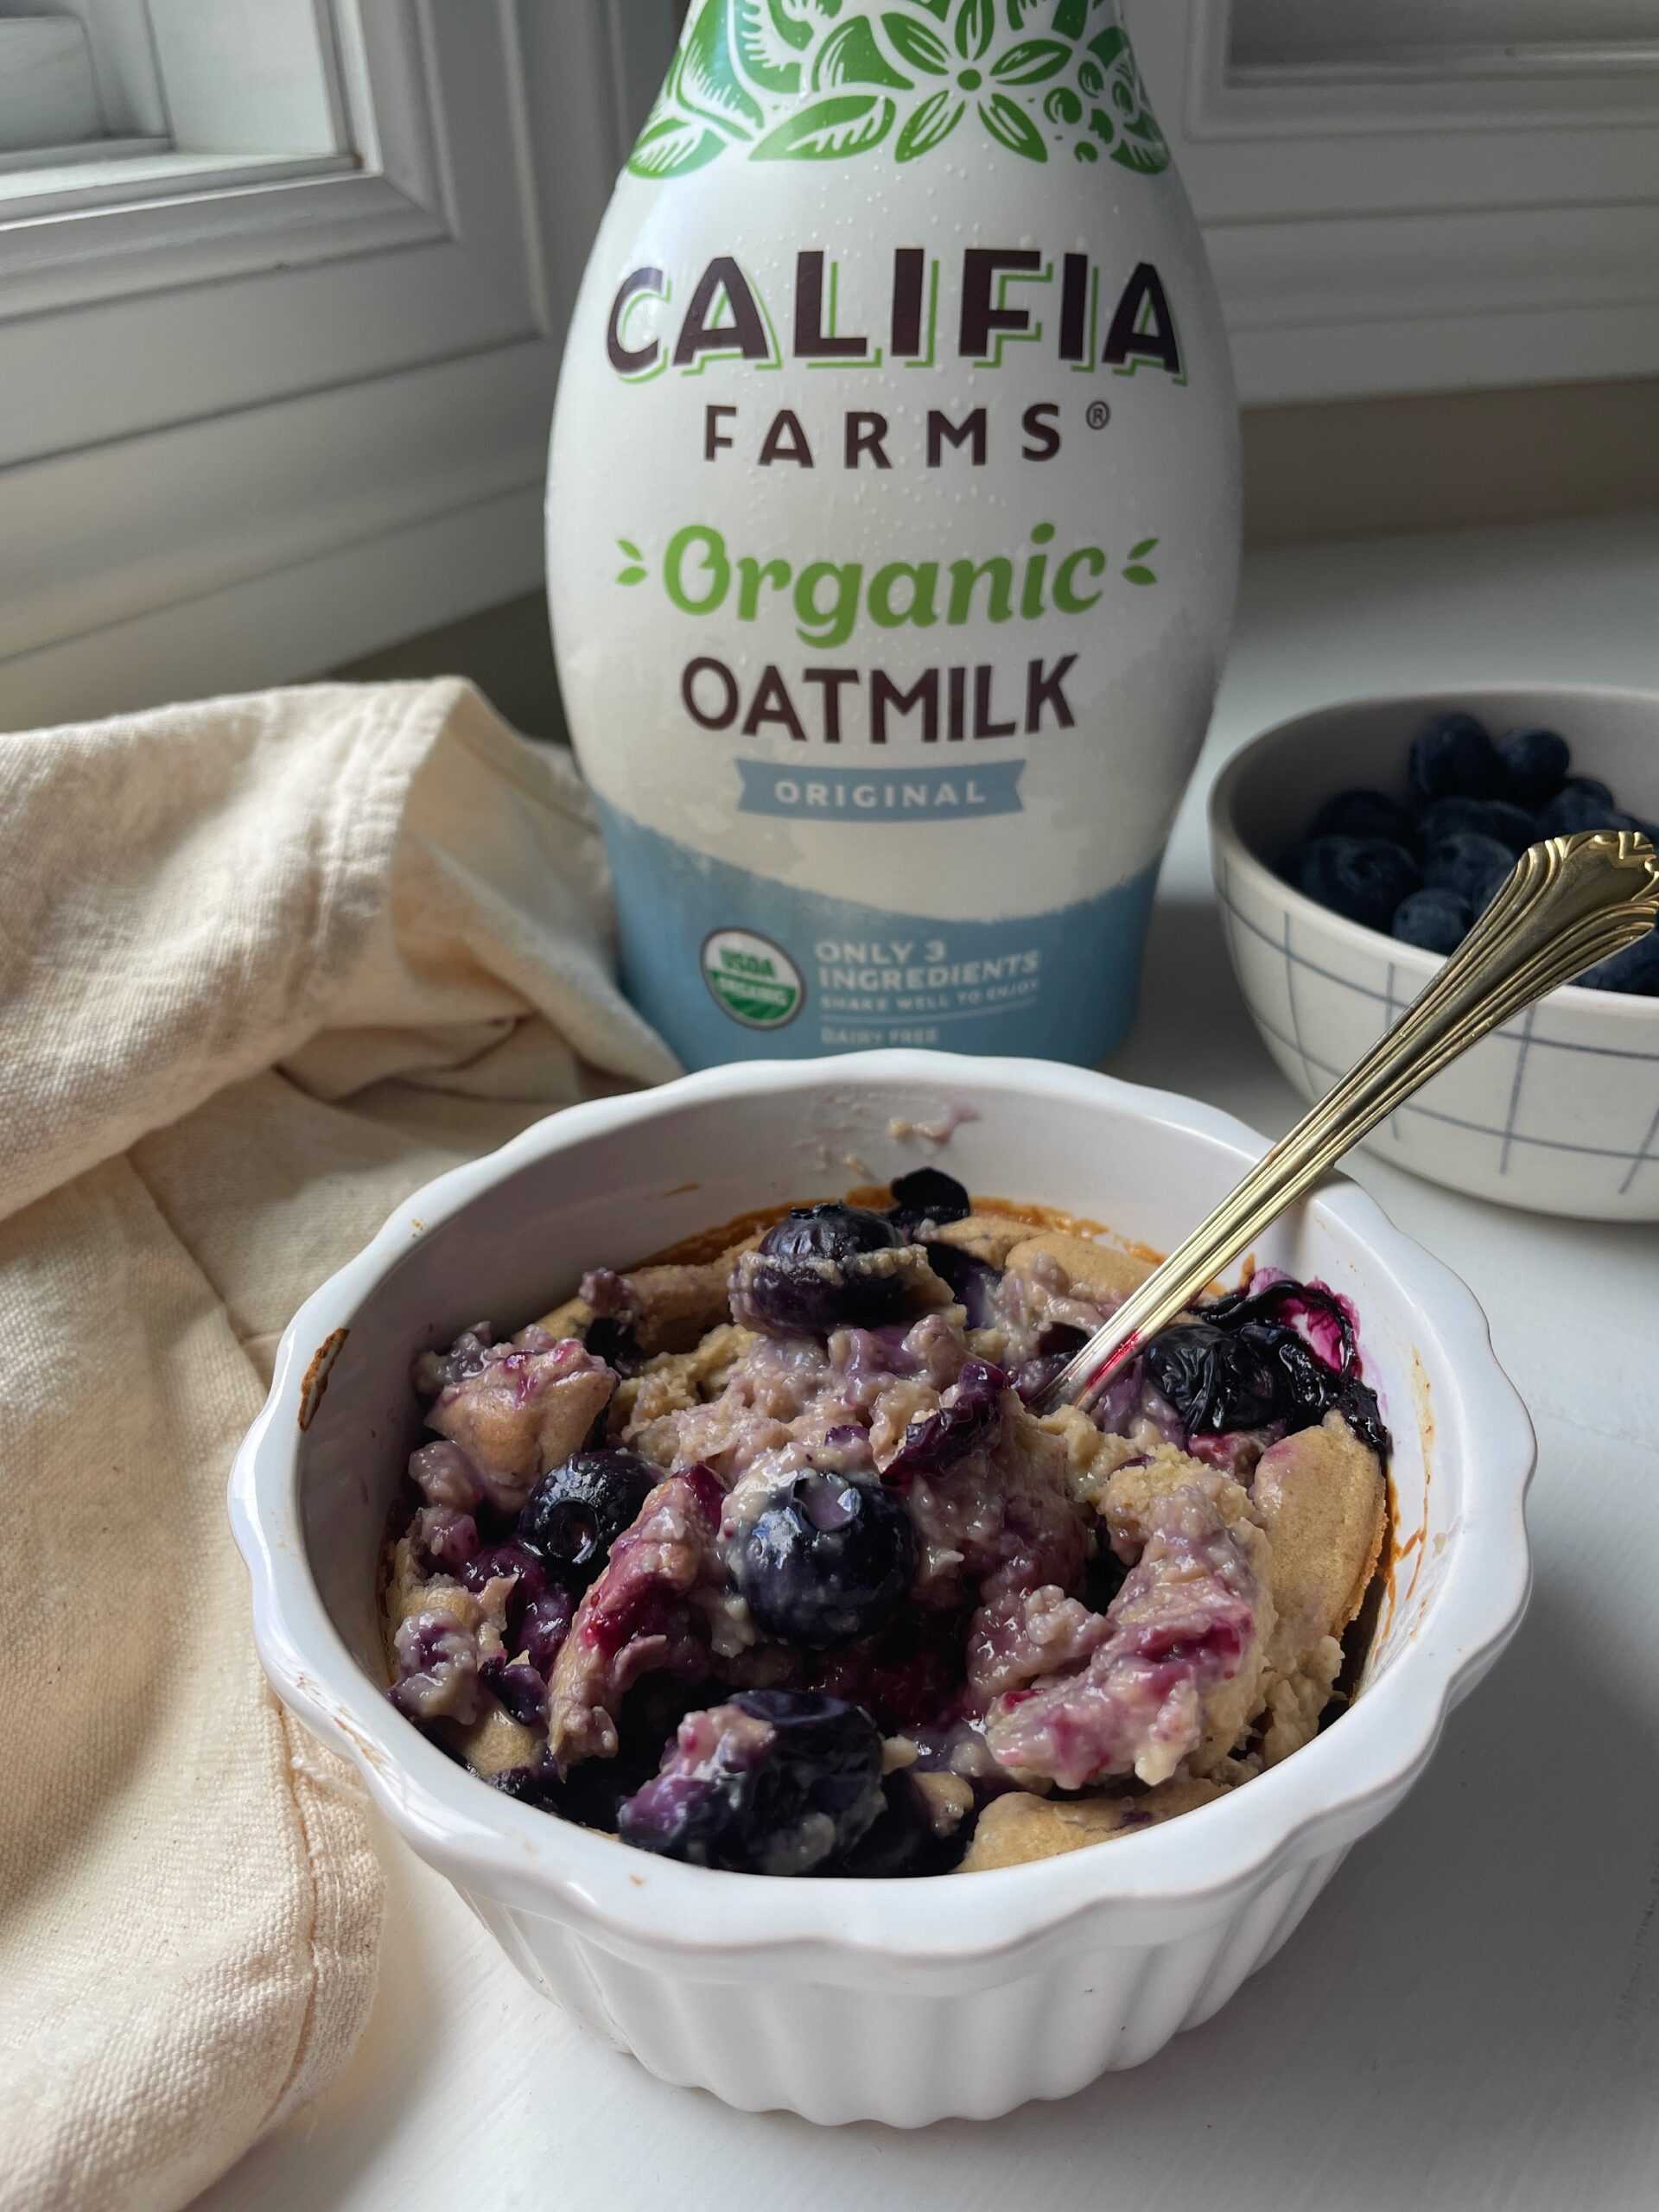 Blueberry baked oatmeal sits in the foreground of the image, with Califia Farms Organic Oatmilk behind.